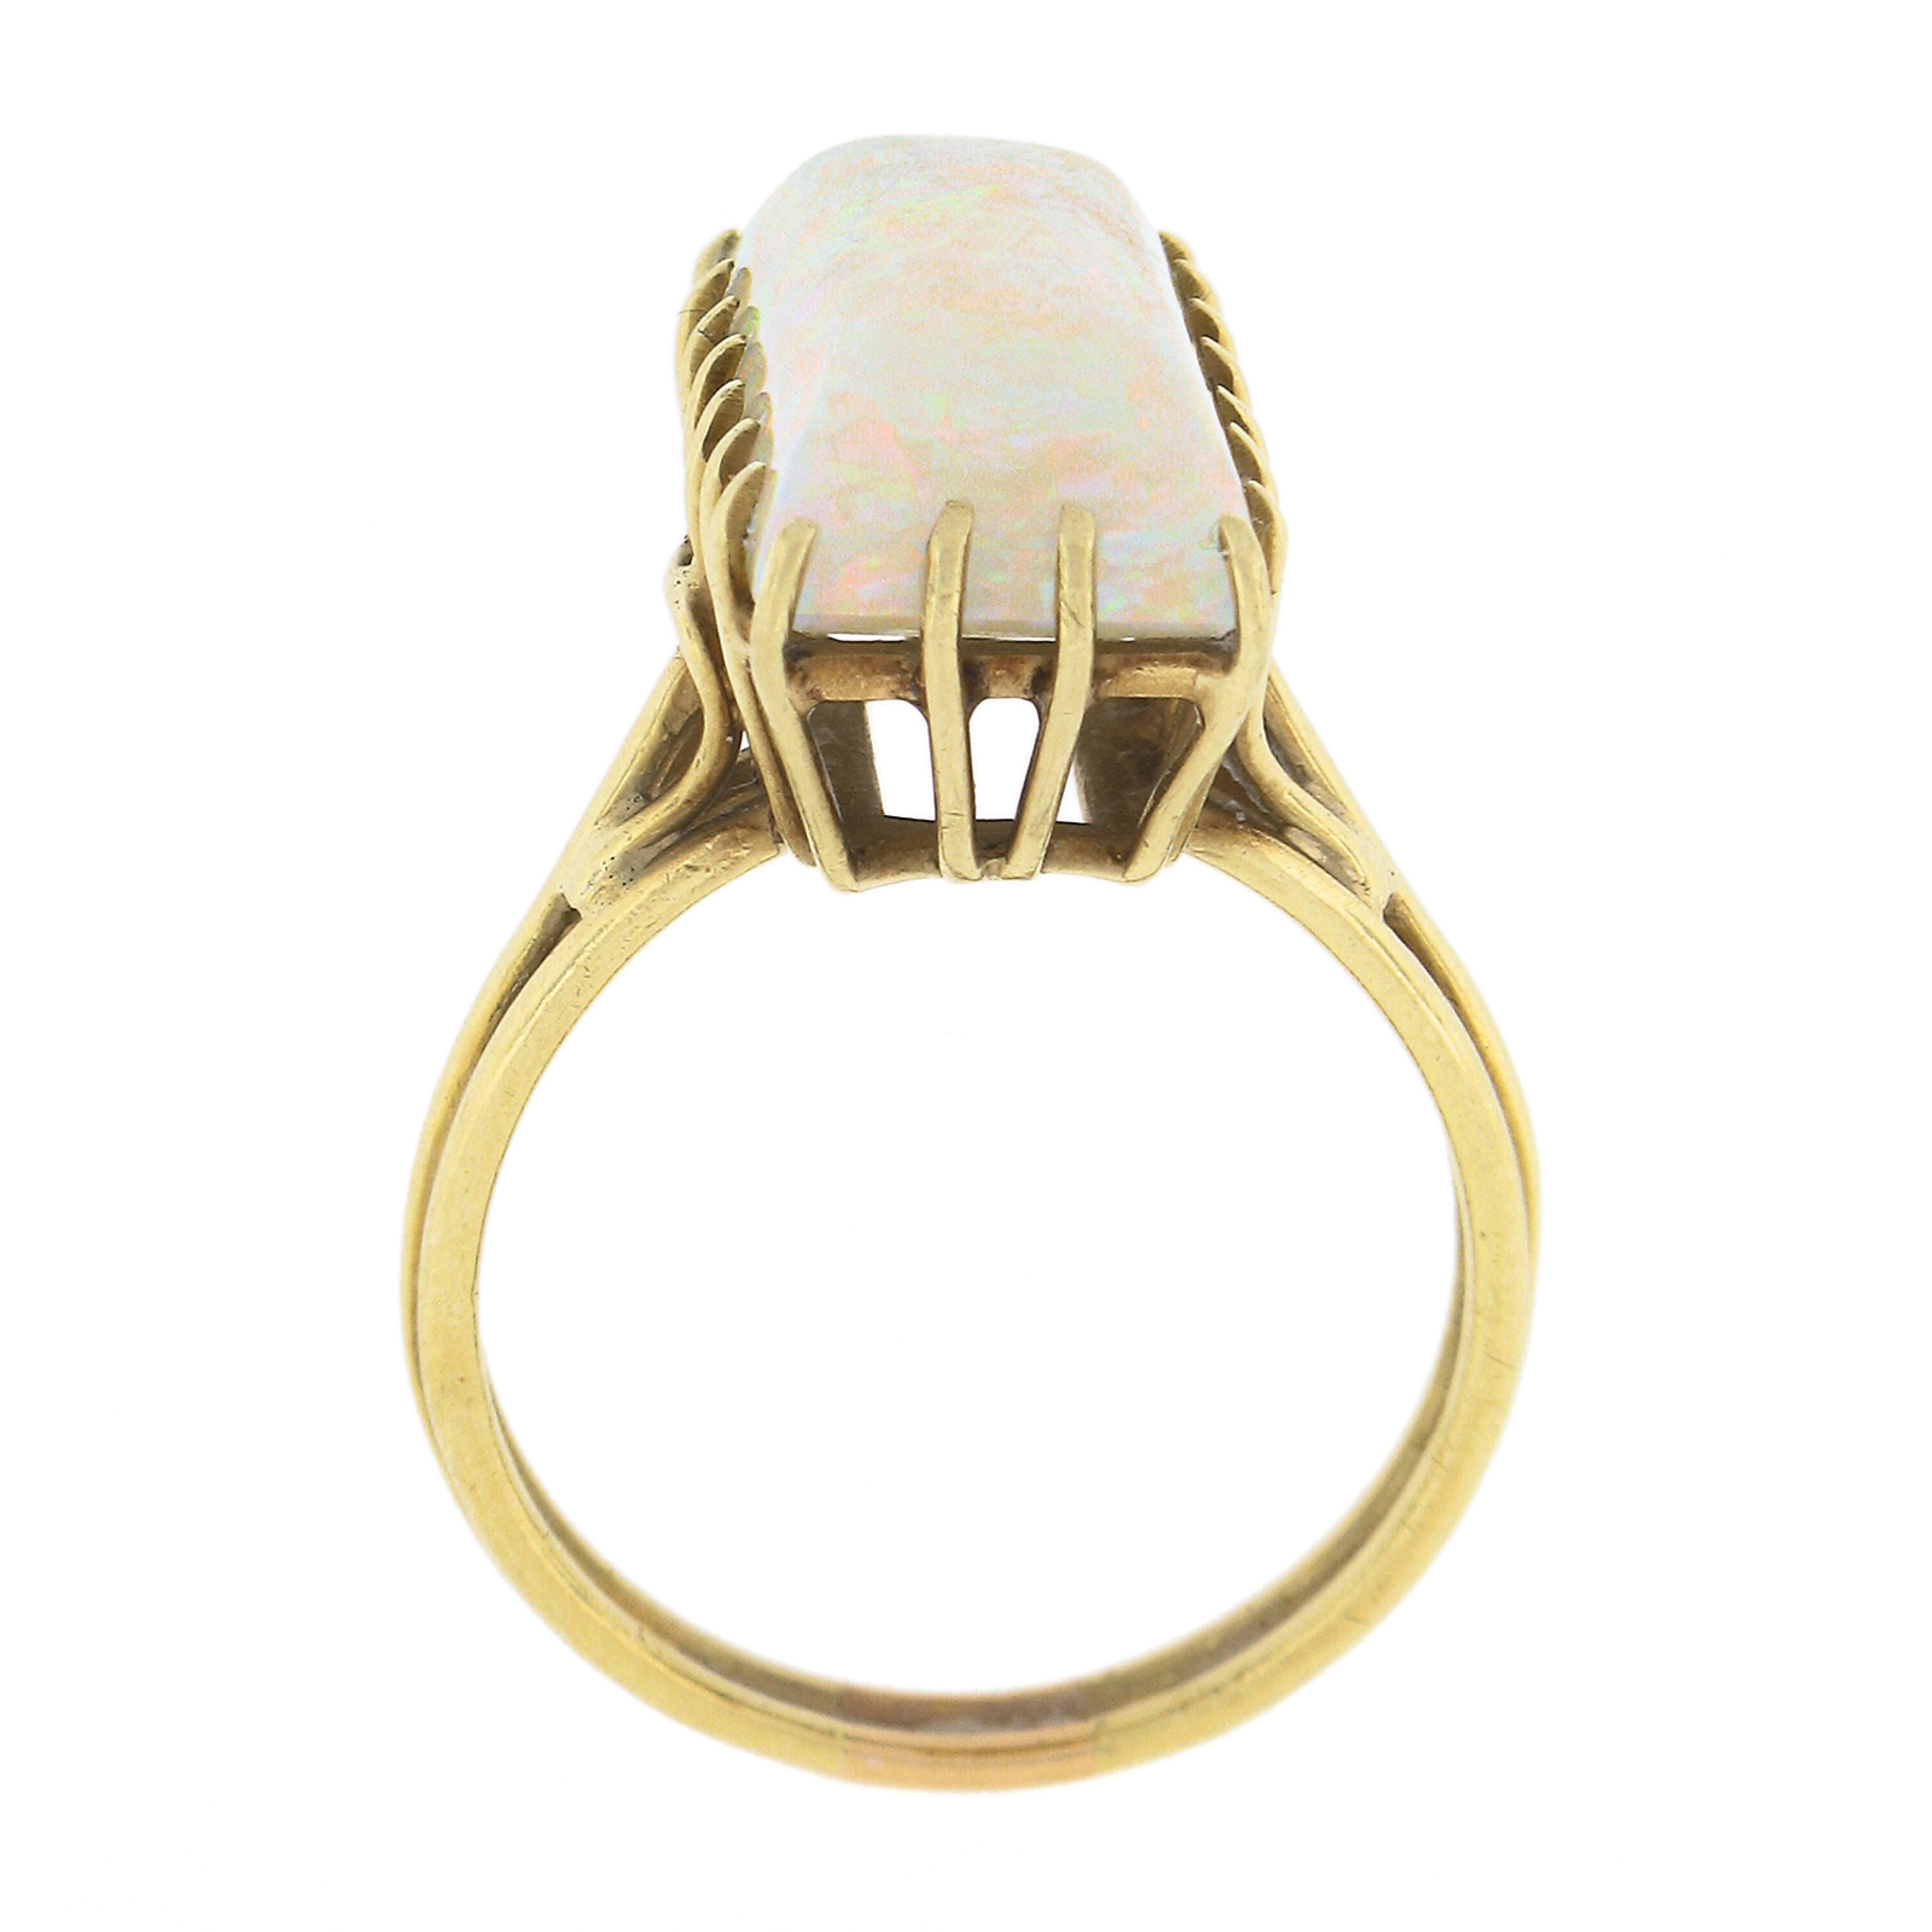 Vintage Handmade 18k Gold Rectangular Cabochon Cut Opal Solitaire Cocktail Ring For Sale 3